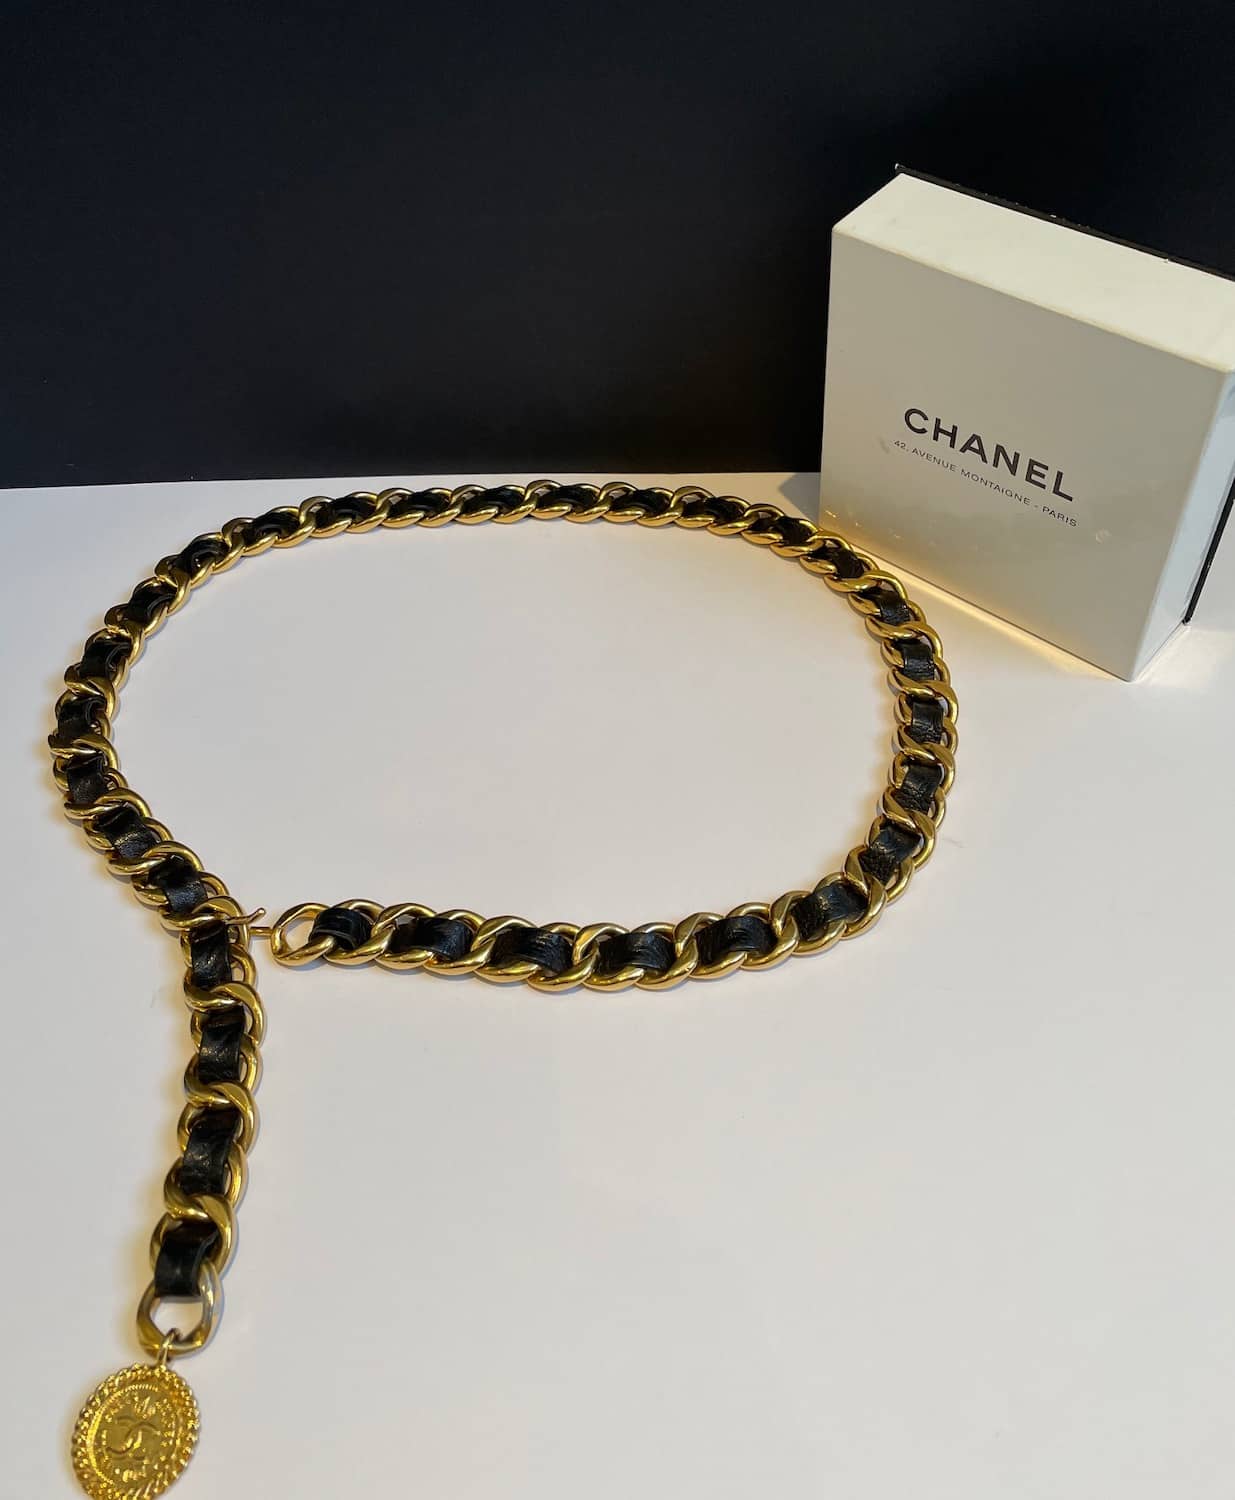 CHANEL Vintage Belt Leather and Gold Link Chain Iconic CC Logo